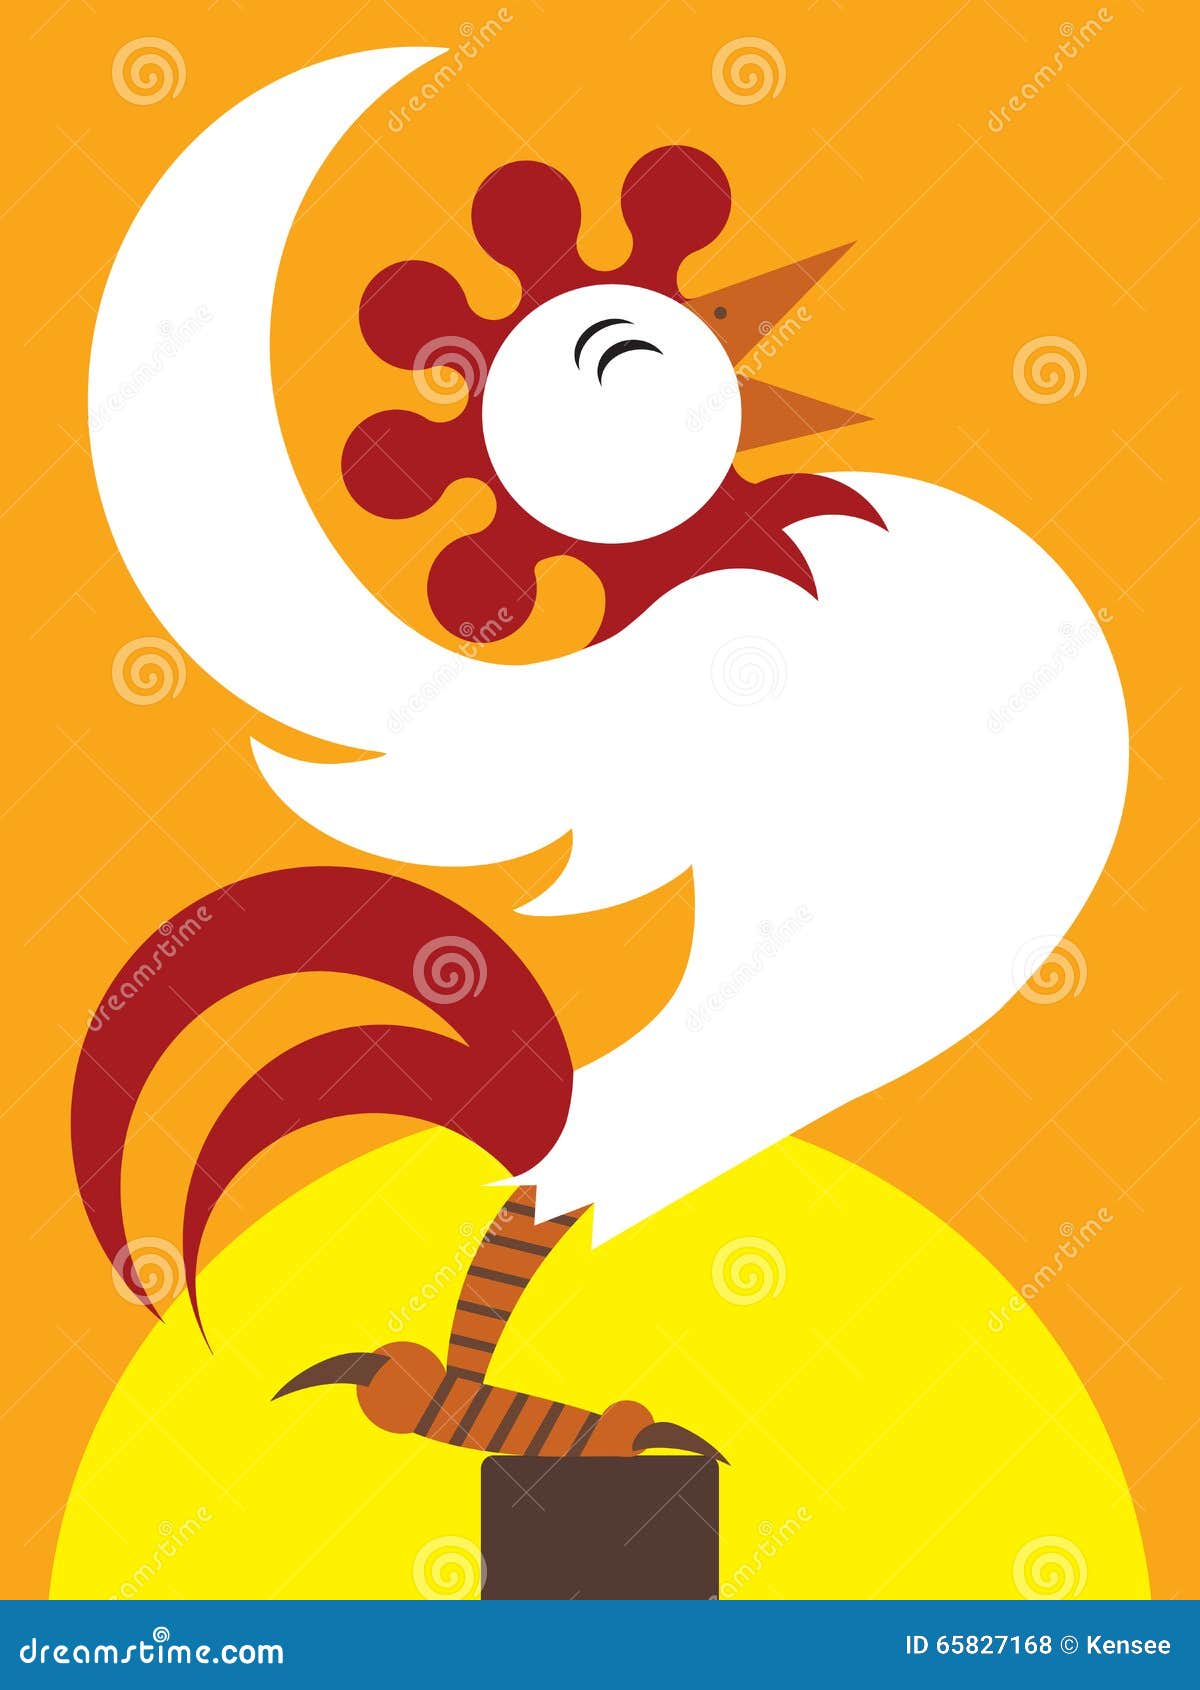 Cartoon Crowing Rooster Stock Illustrations – 730 Cartoon Crowing Rooster  Stock Illustrations, Vectors & Clipart - Dreamstime